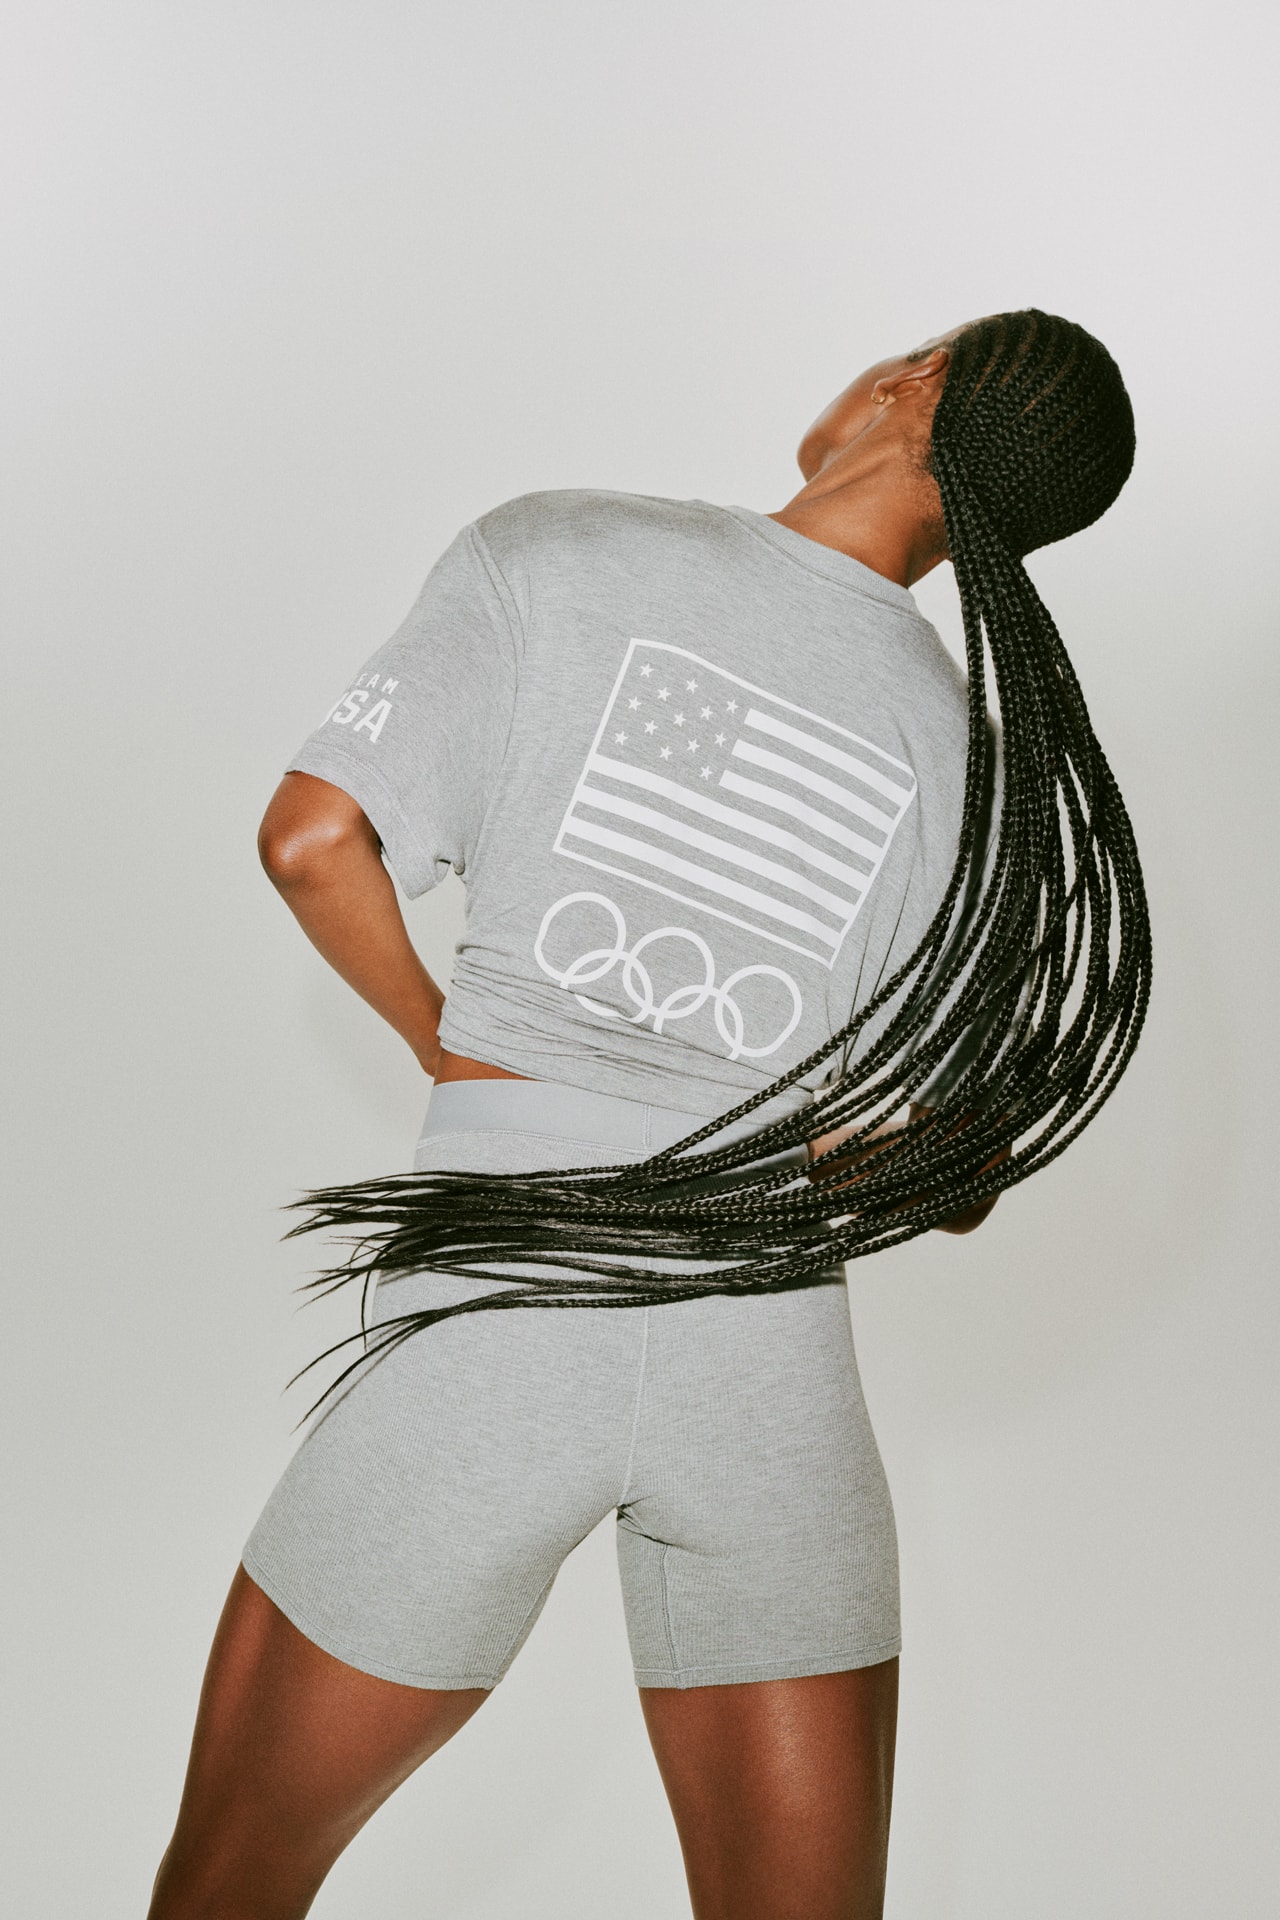 SKIMS Is Making Loungewear For Team USA